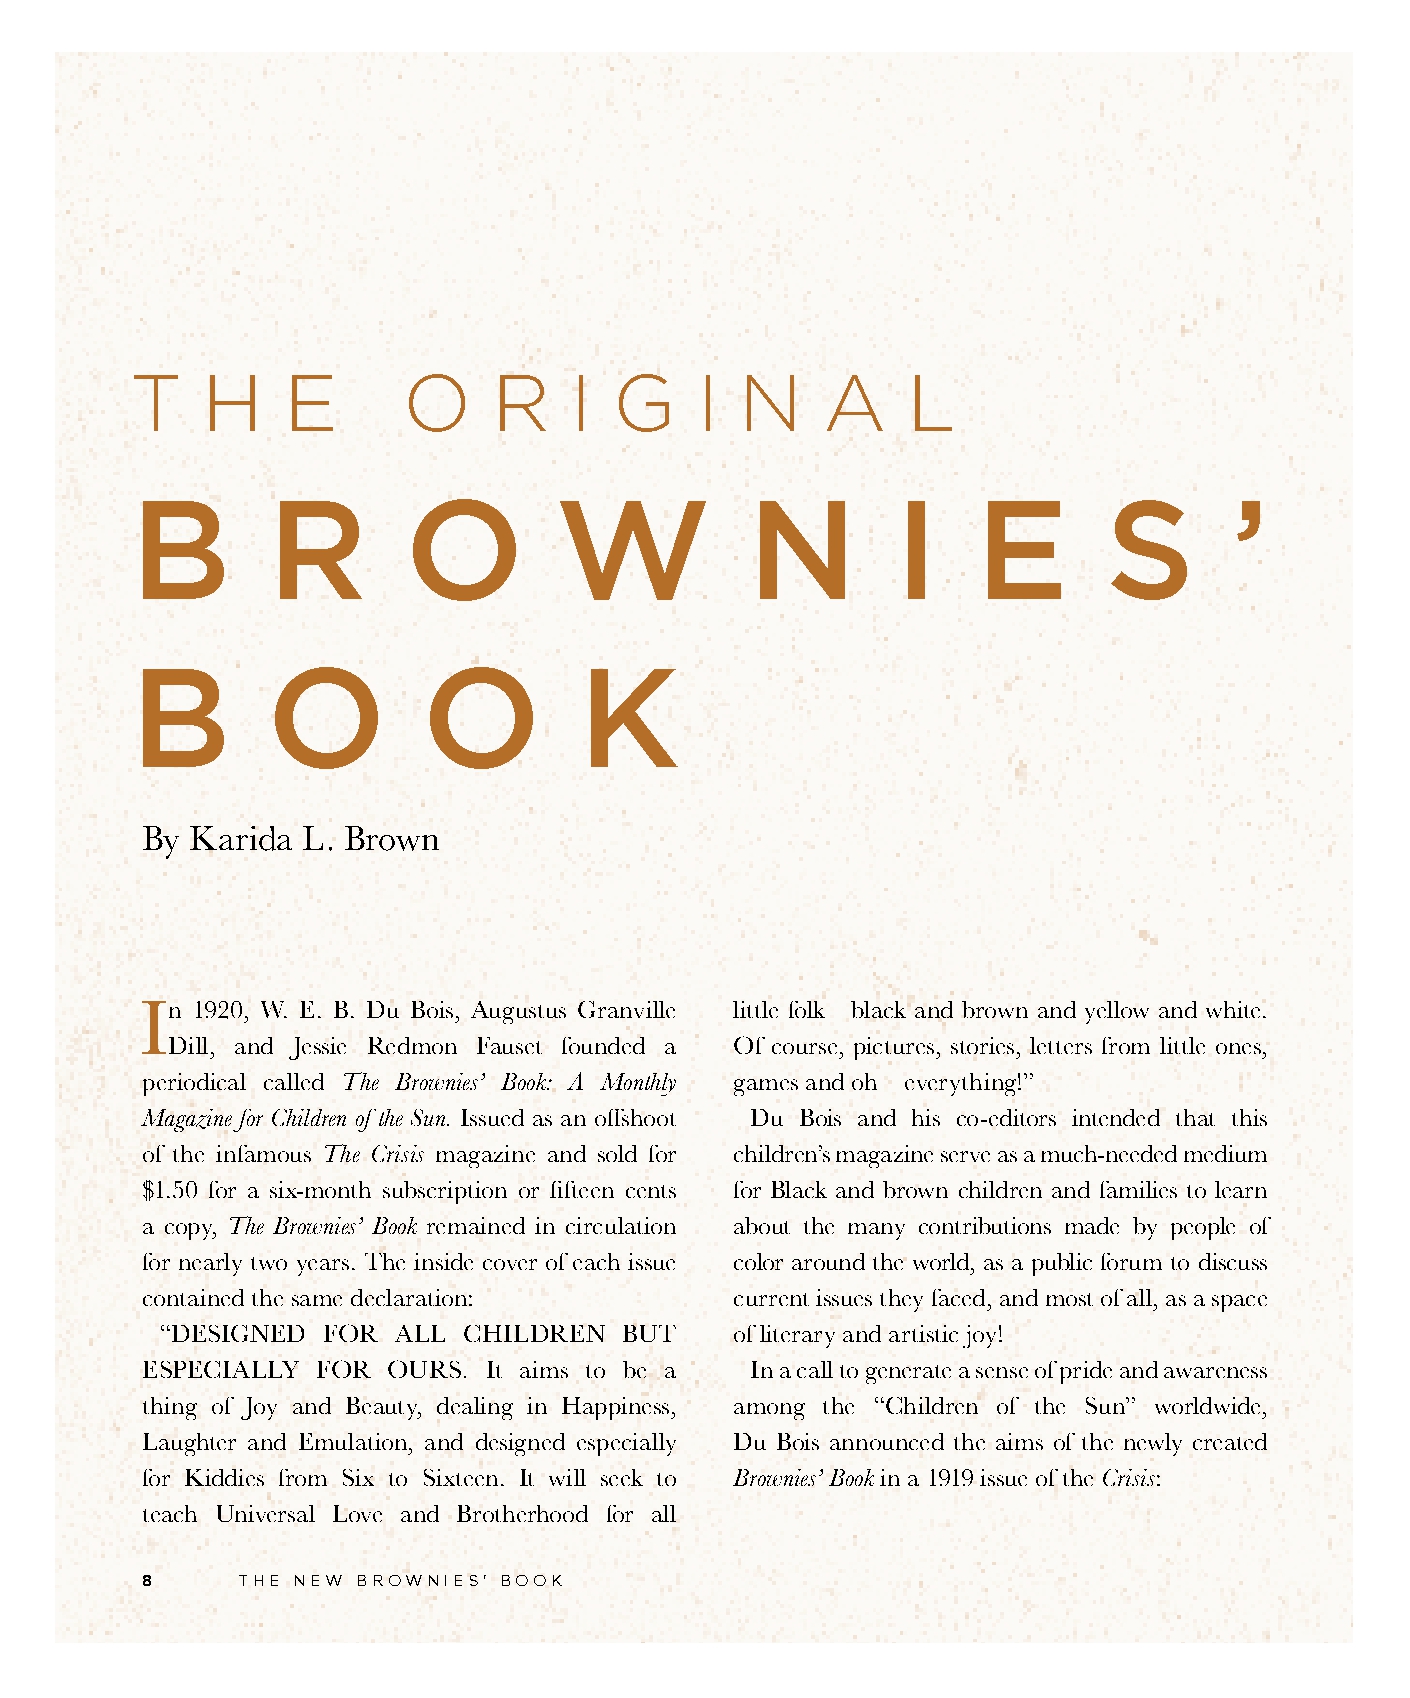 The New Brownies' Book